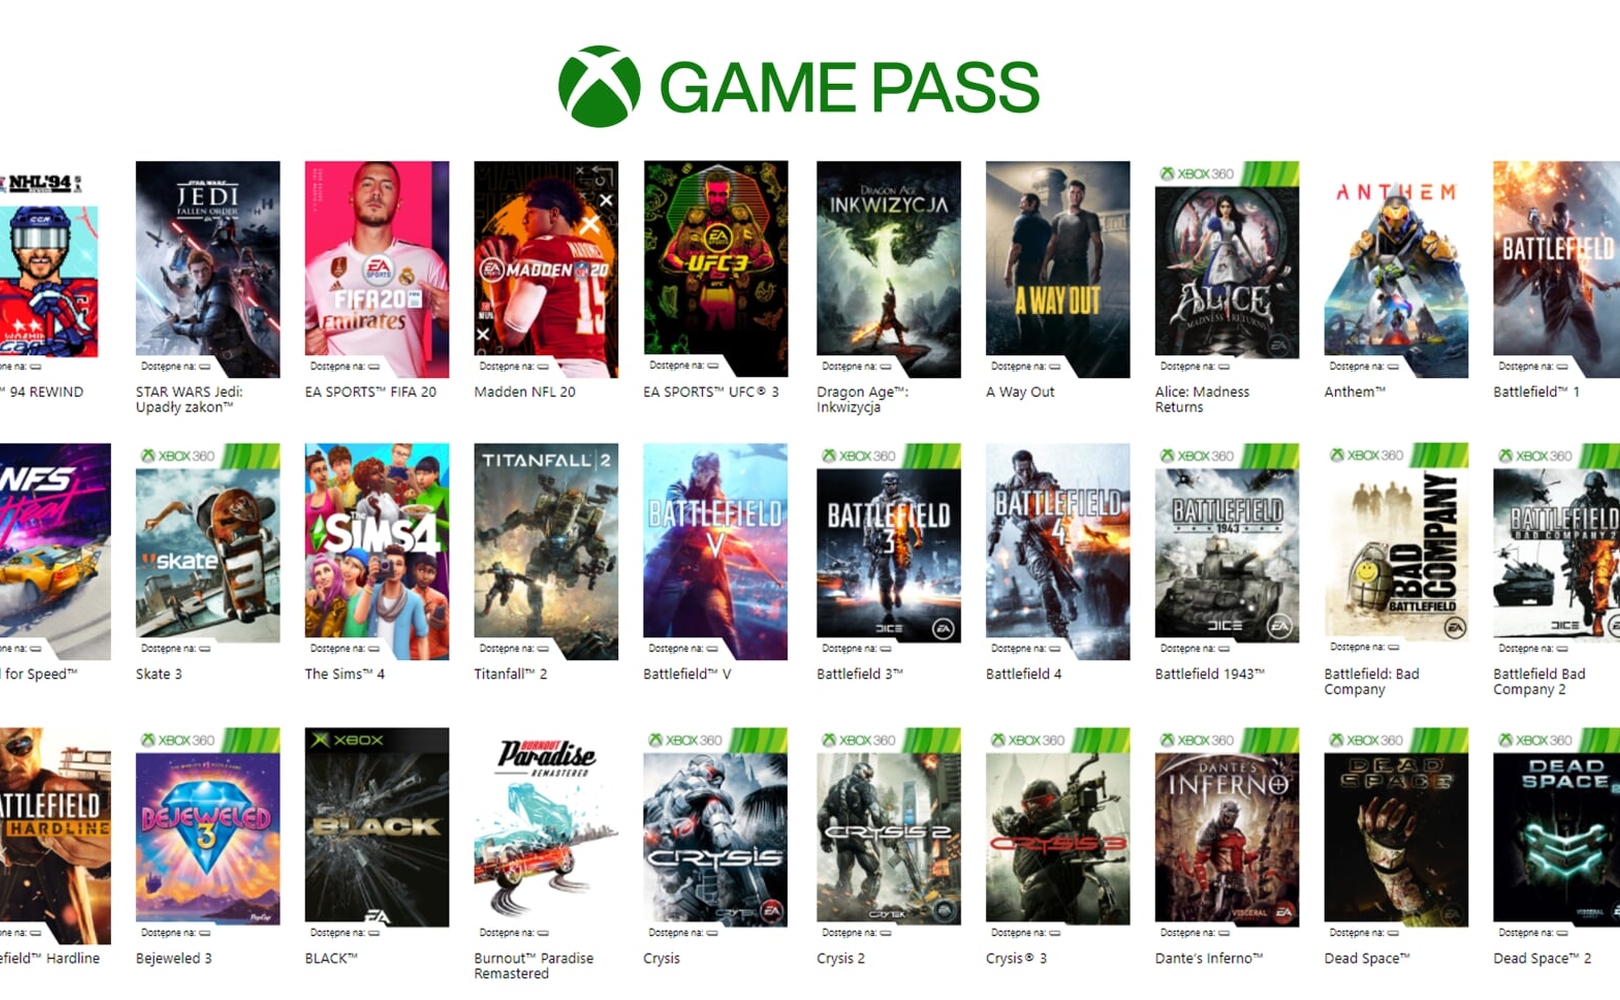 how to get ea play with xbox game pass